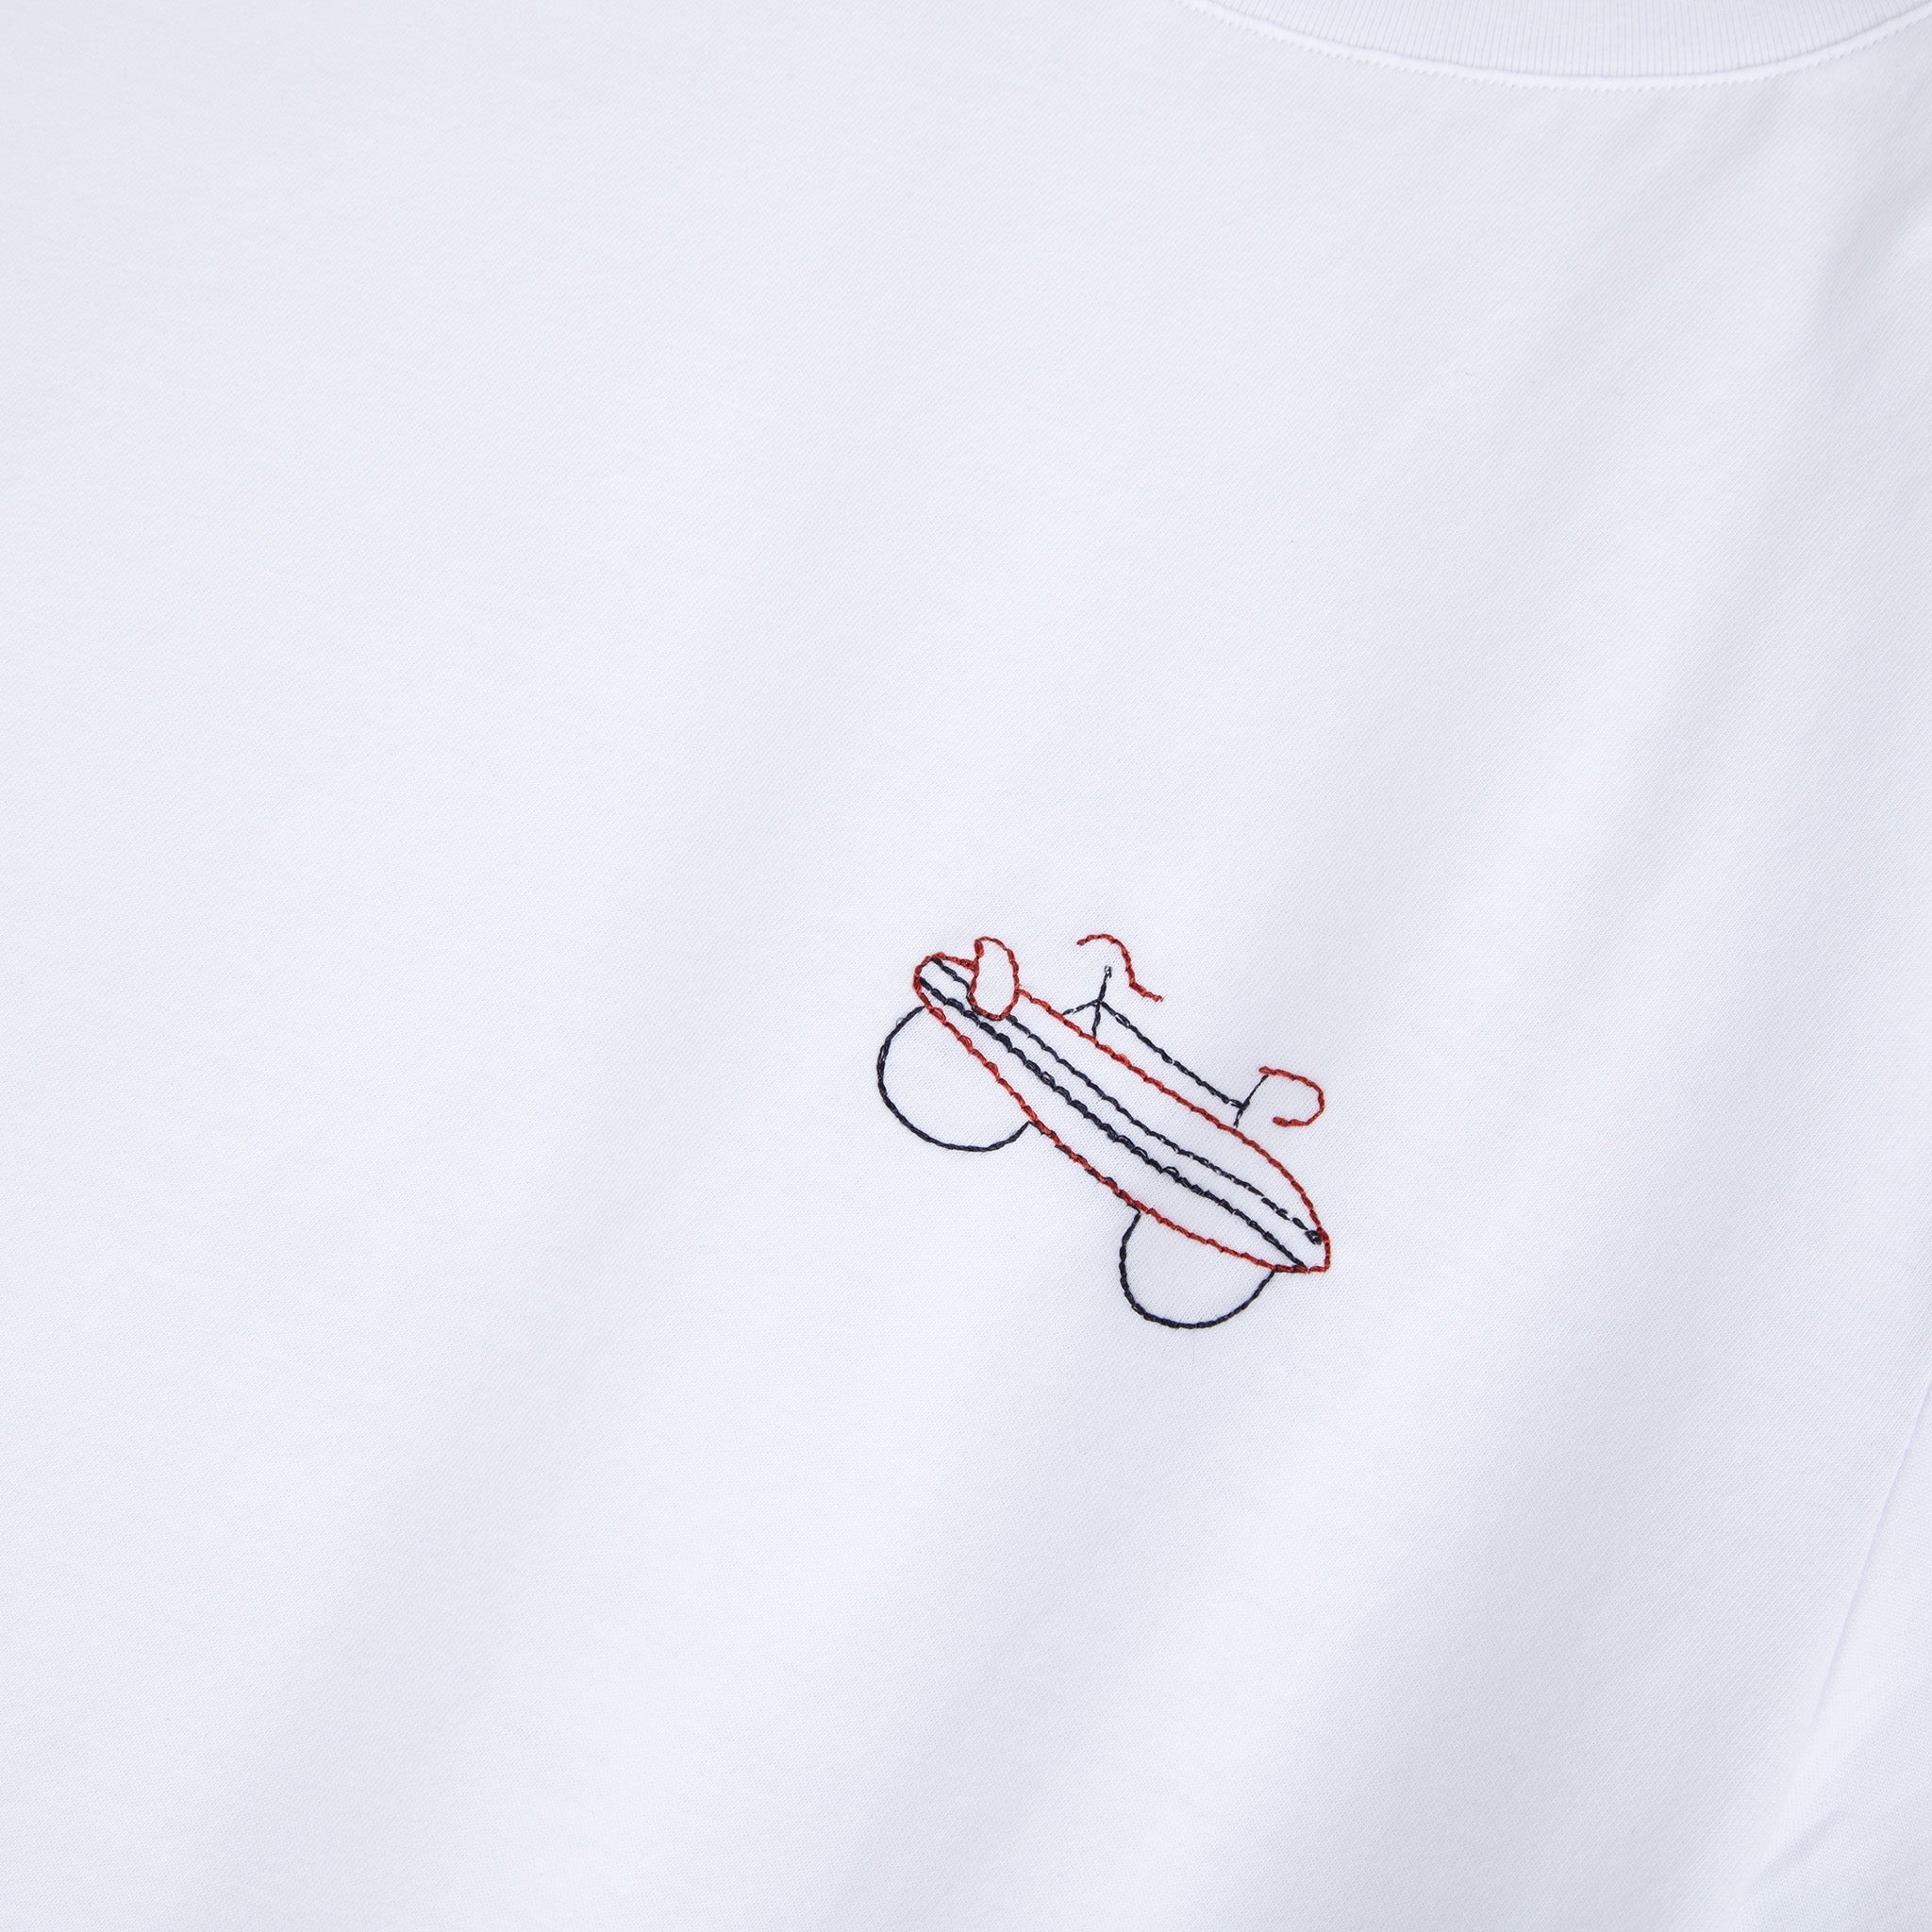 Faguo - White t-shirt "velo surf" in recycled cotton - Arcy - The Good Chic